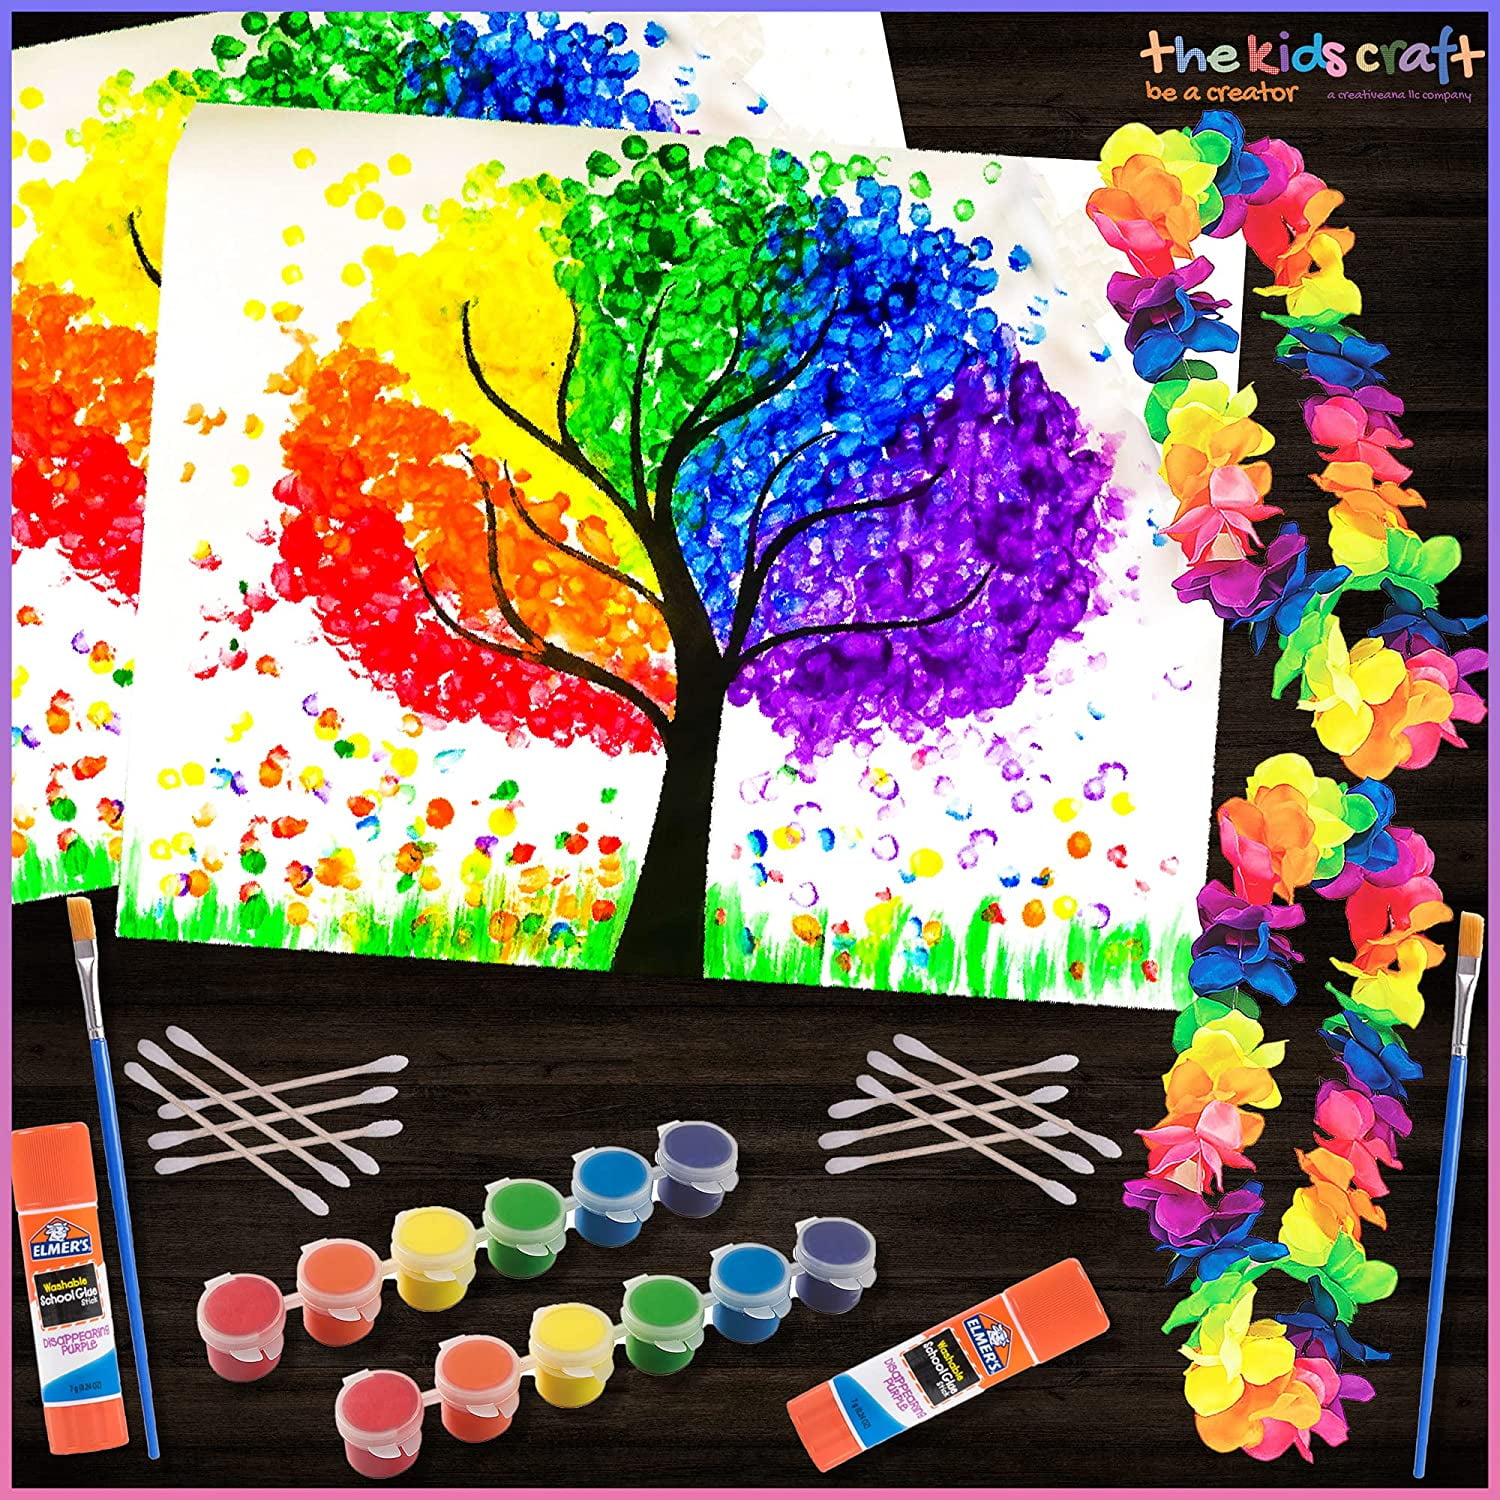 EAPHANT Diamond Painting Kits Diamond Art Kits for Kids 18Pcs Diamond  Painting Stickers Art and Crafts for Kids Ages 4-8 8-12 5D